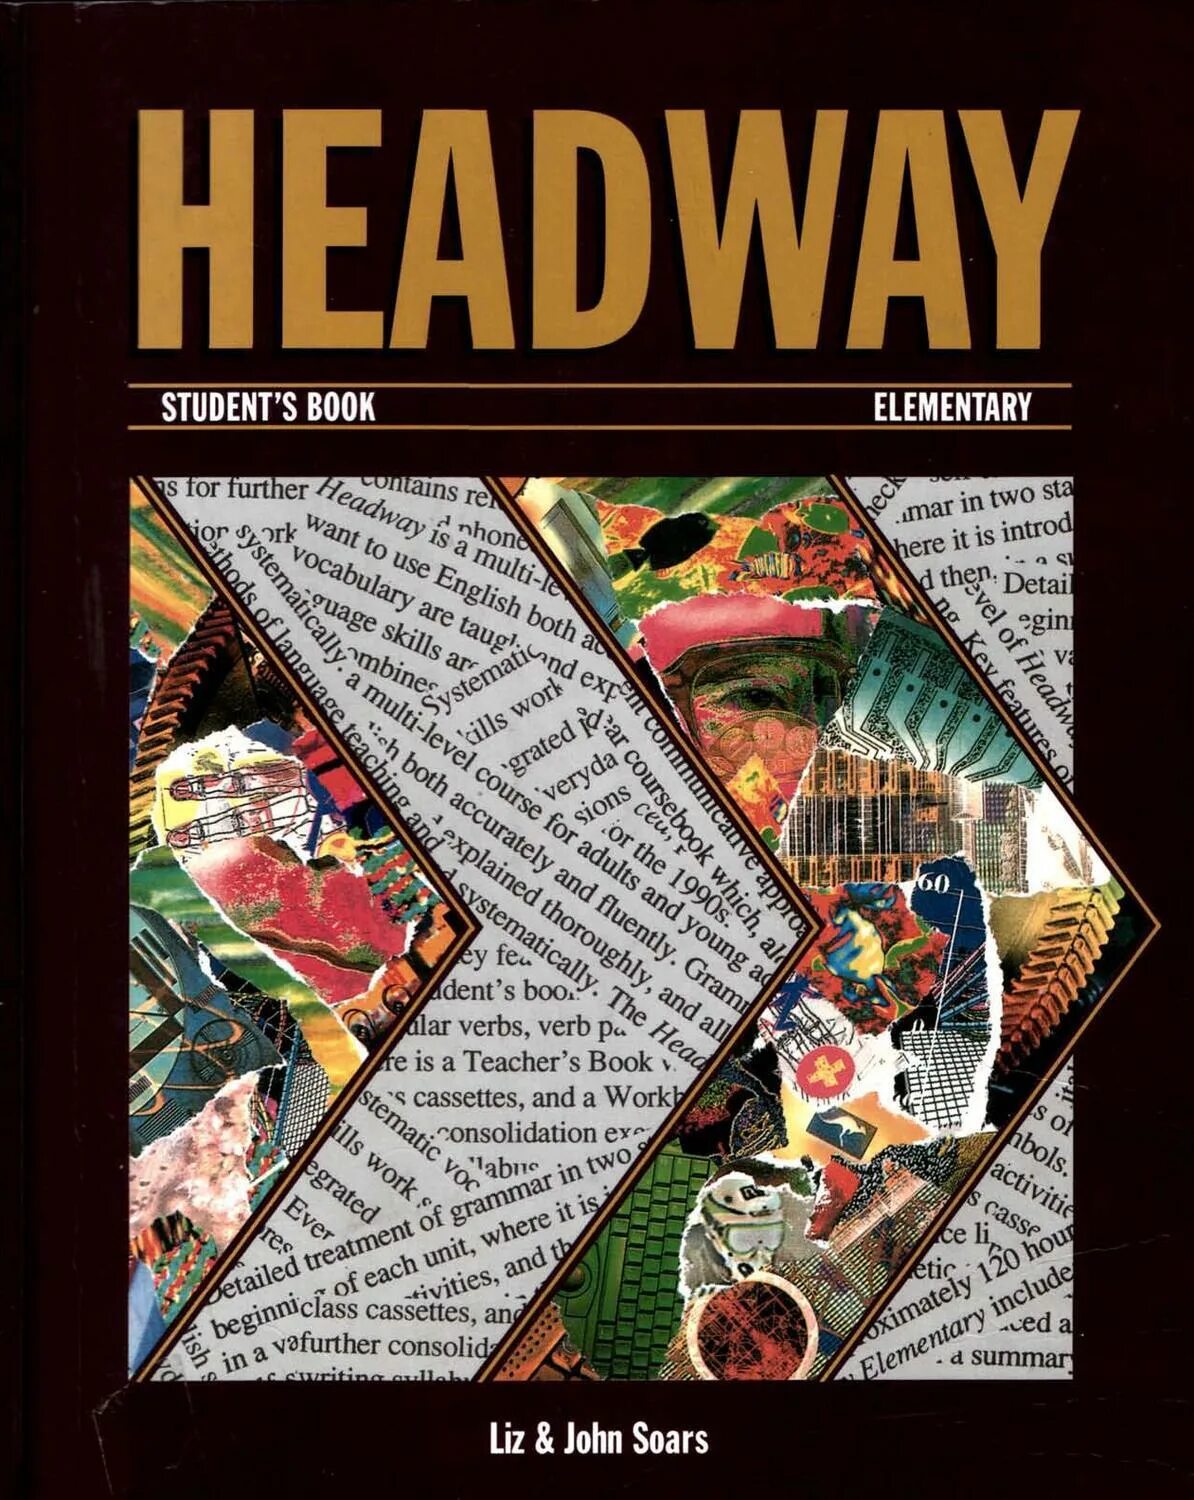 Headway Elementary Edition students book. Headway Elementary 1st Edition. Headway Elementary student book Oxford. Headway Elementary книга. Headway elementary student